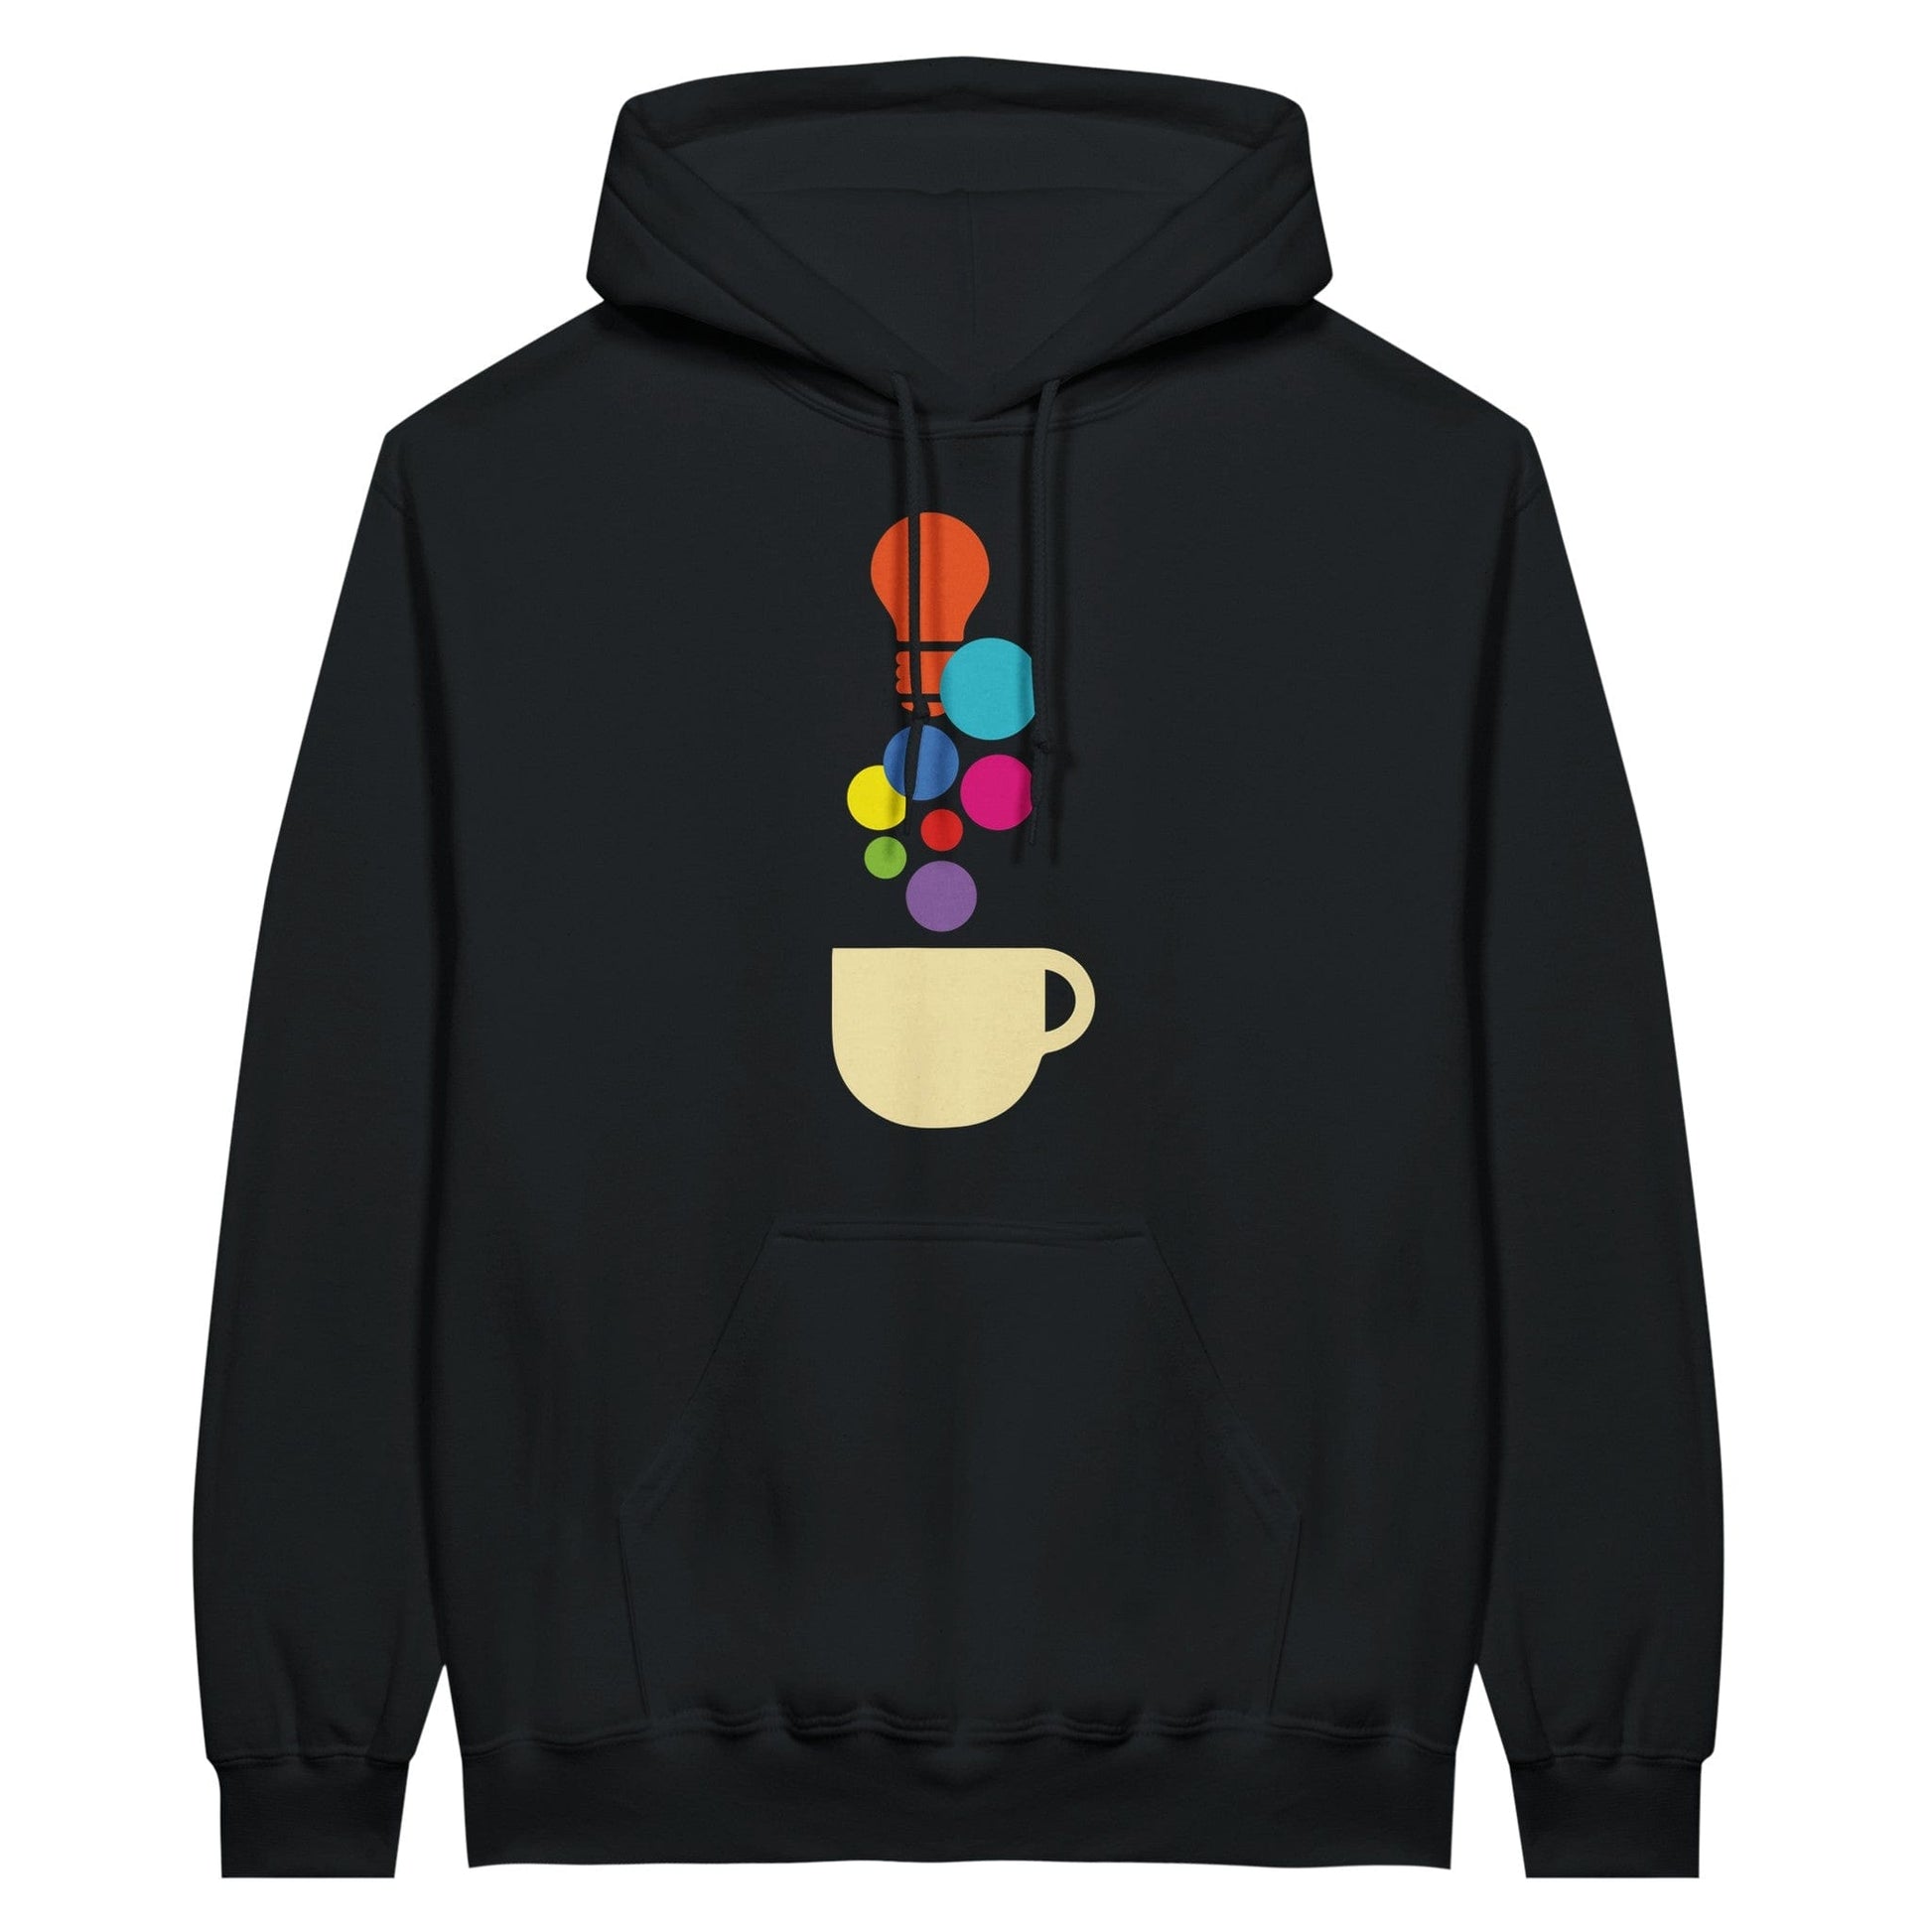 Good Bean Gifts "Creativity in a Cup" - Classic Unisex Pullover Hoodie S / Black